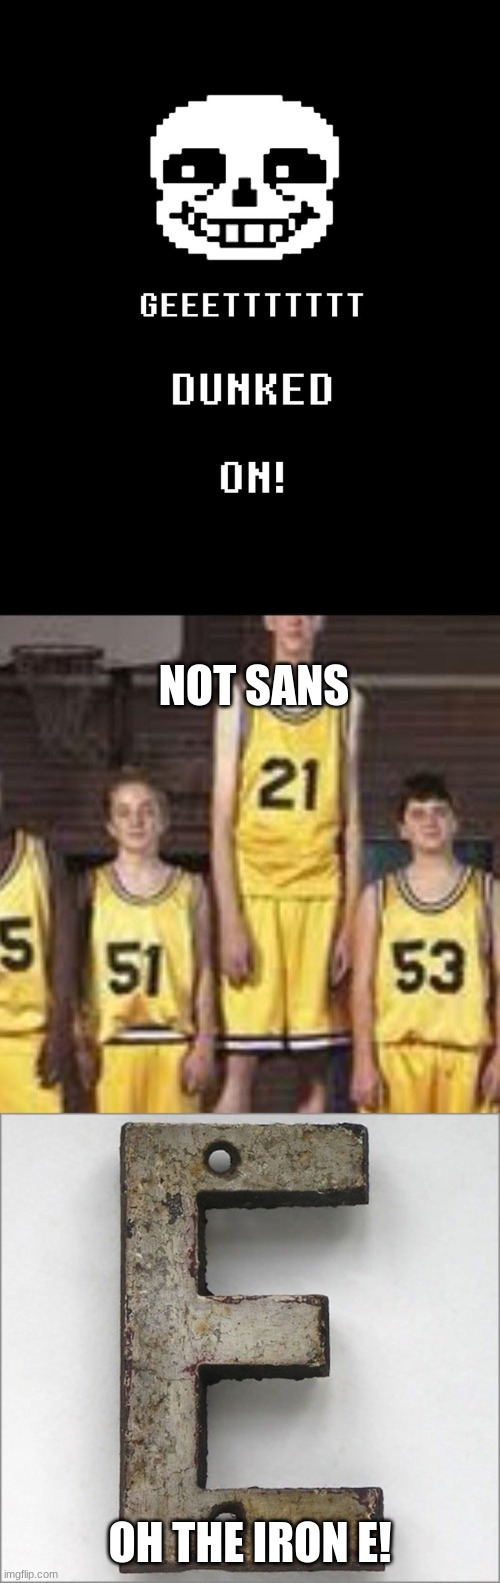 NOT SANS; OH THE IRON E! | image tagged in get dunked on,abnormally tall basketball player,oh the iron e | made w/ Imgflip meme maker